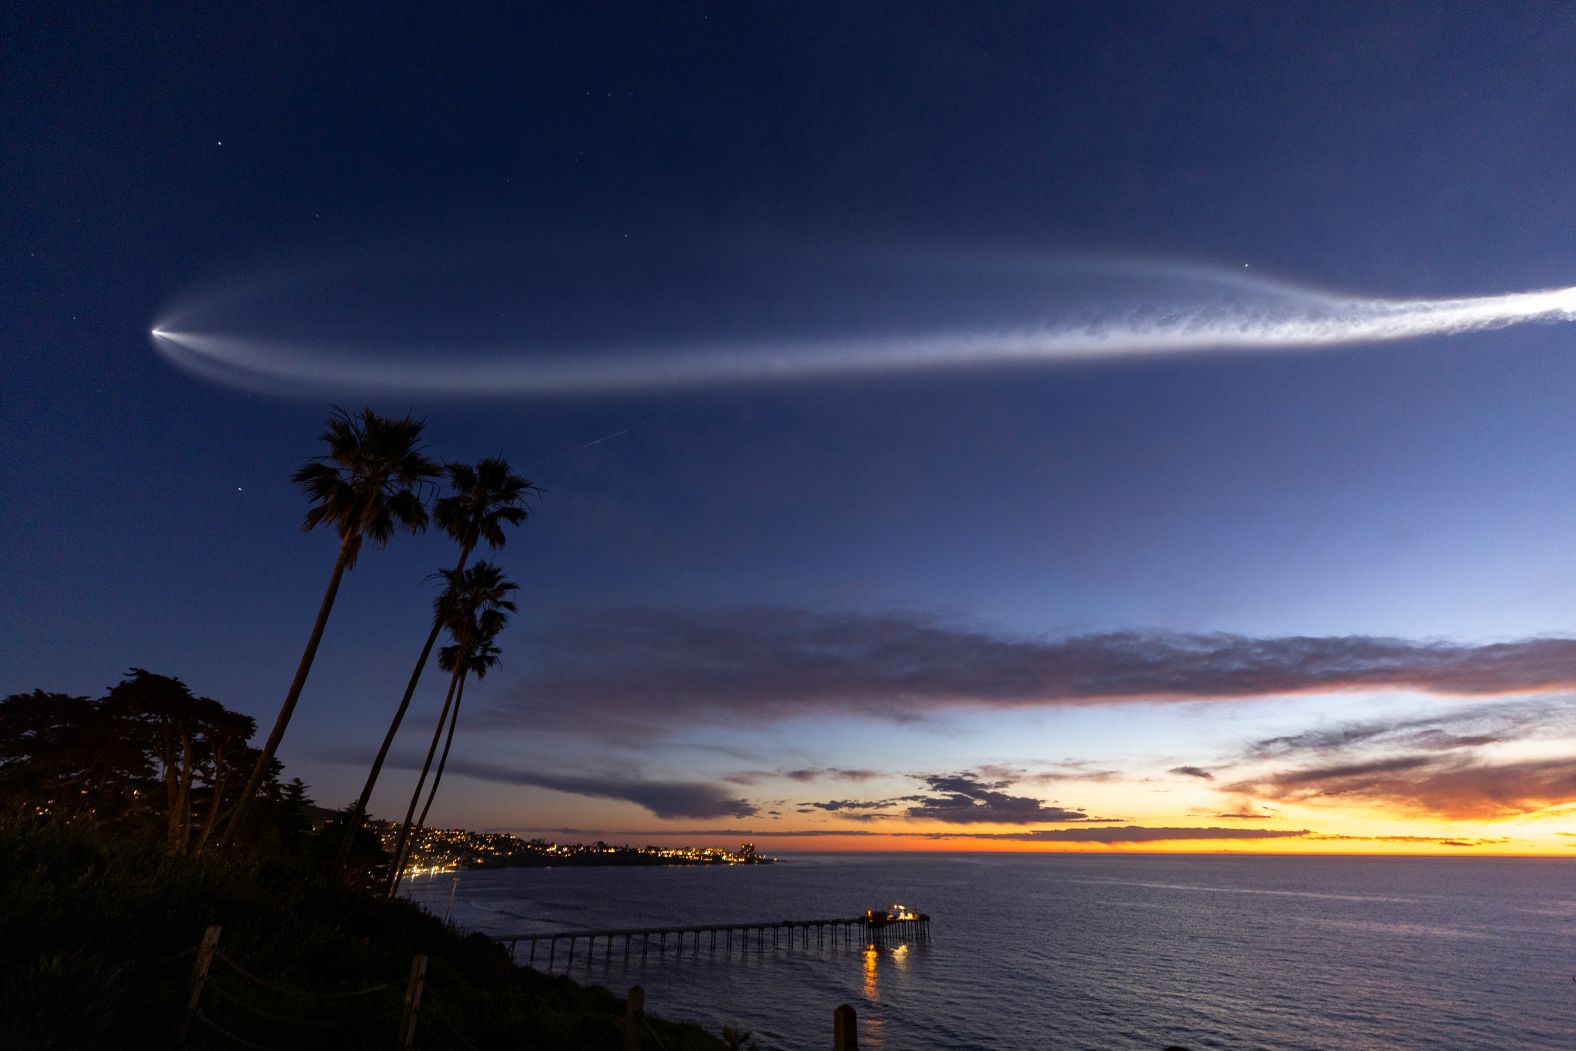 A SpaceX Falcon 9 rocket carrying a payload of 22 Starlink internet satellite into space soars across the sky, as seen from San Diego, on Monday, March 18. <a href="index.php?page=&url=https%3A%2F%2Fwww.cnn.com%2F2024%2F03%2F14%2Fworld%2Fgallery%2Fphotos-this-week-march-7-march-14%2Findex.html" target="_blank">See last week in 36 photos</a>.